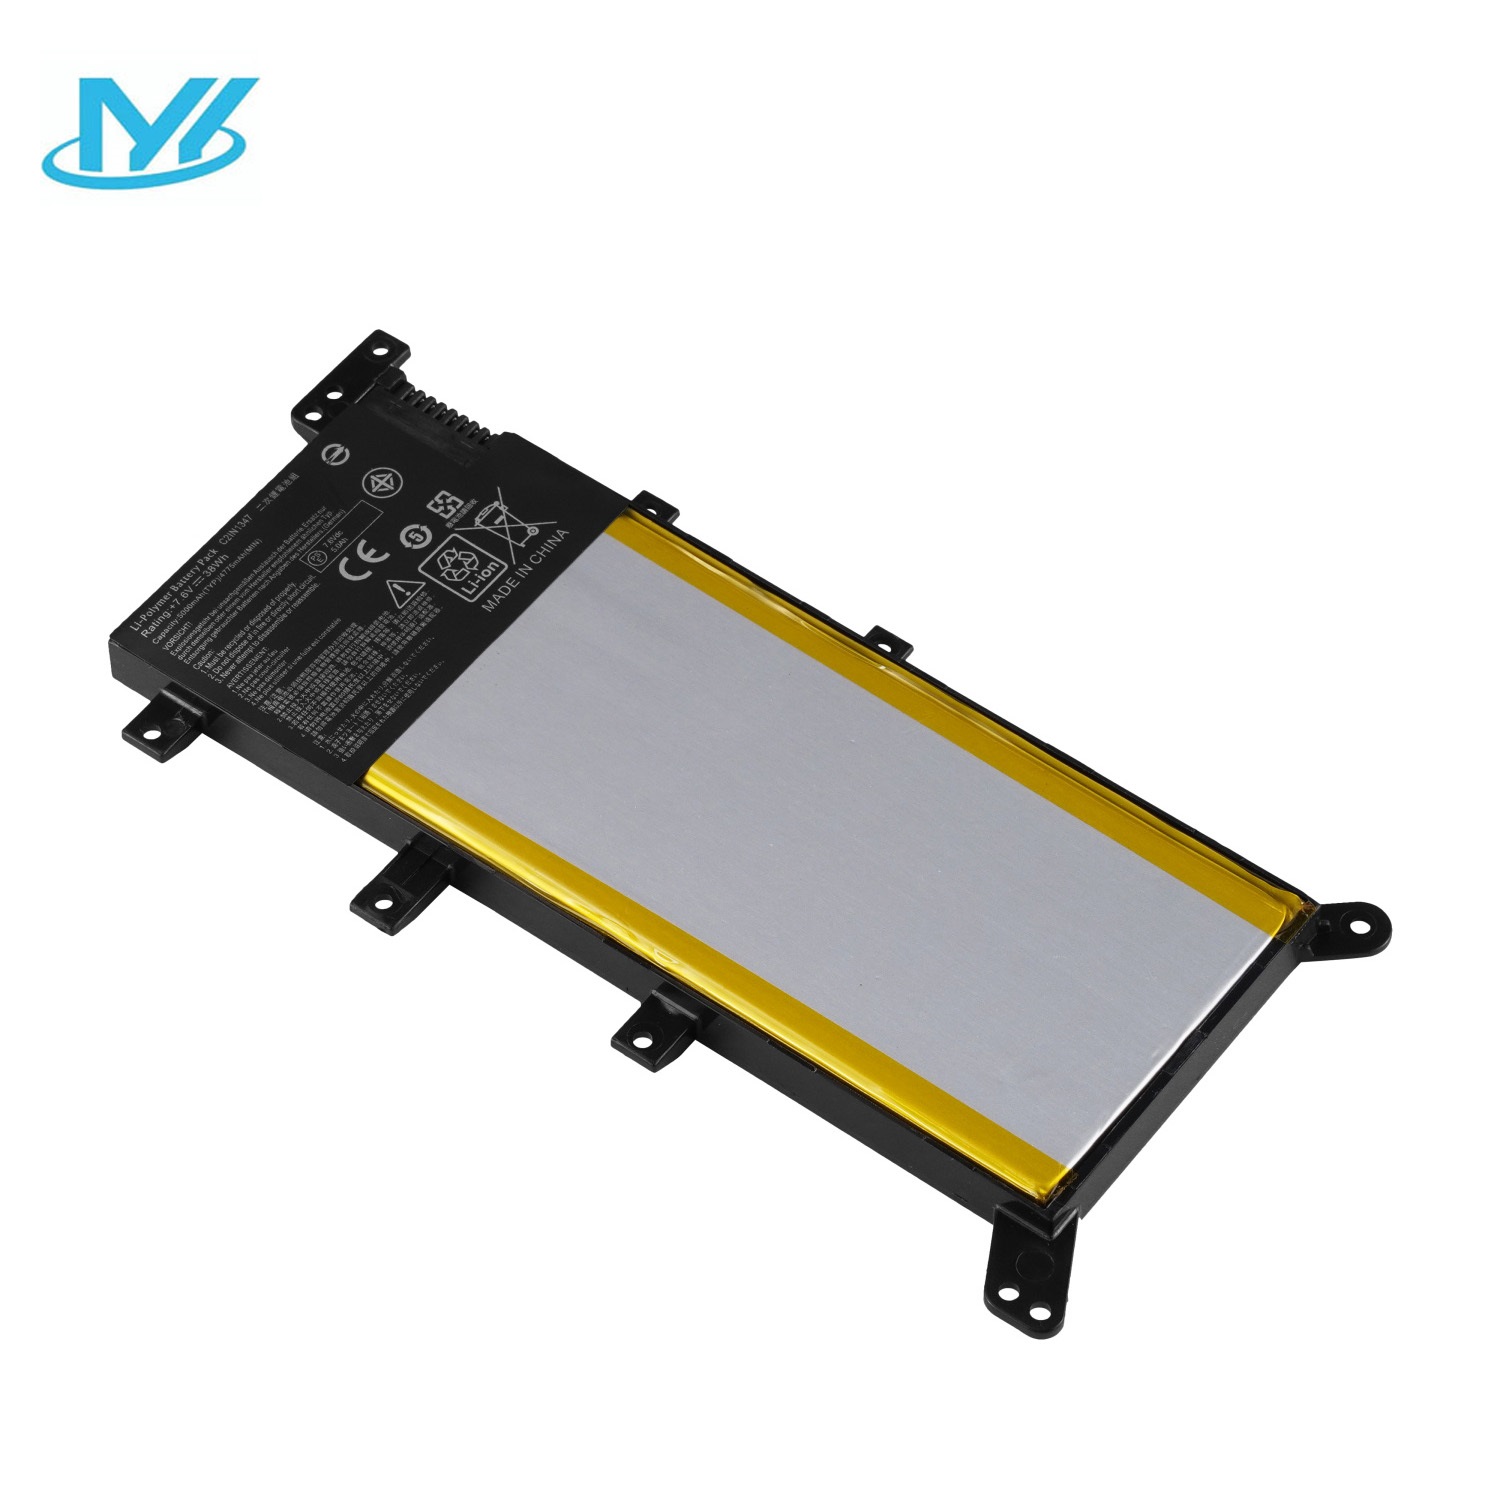 C21N1347 Laptop Battery notebook battery for Asus X555 X555LA X555LD X555LN A555L K555L Y583LD W519LD K555LD K555LA R556L VM590L